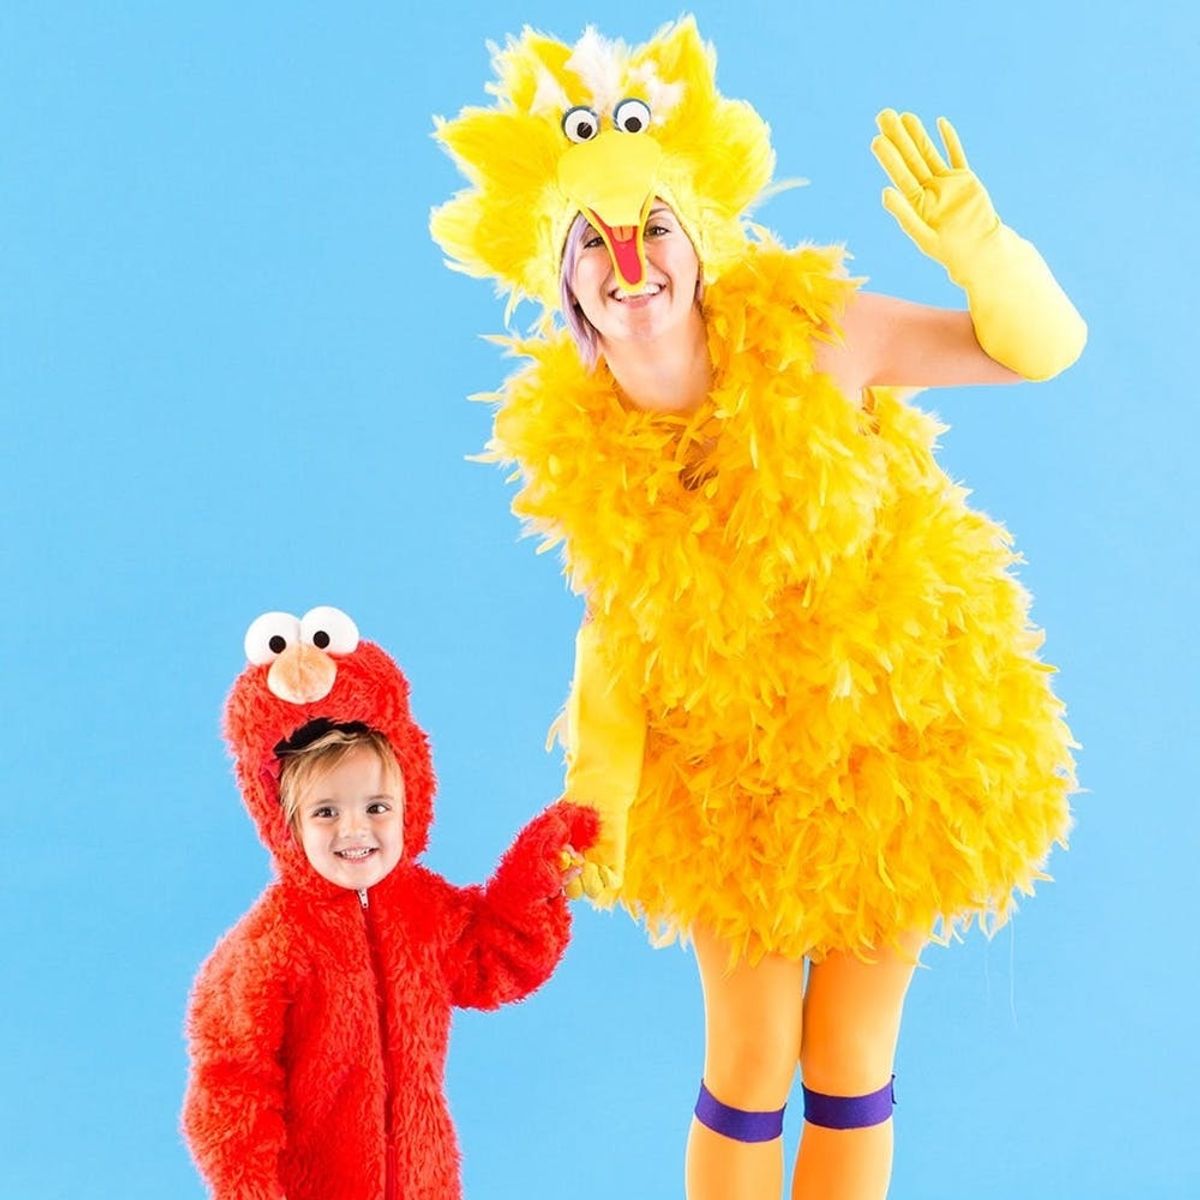 Head to Sesame Street in This Mommy and Me Halloween Costume